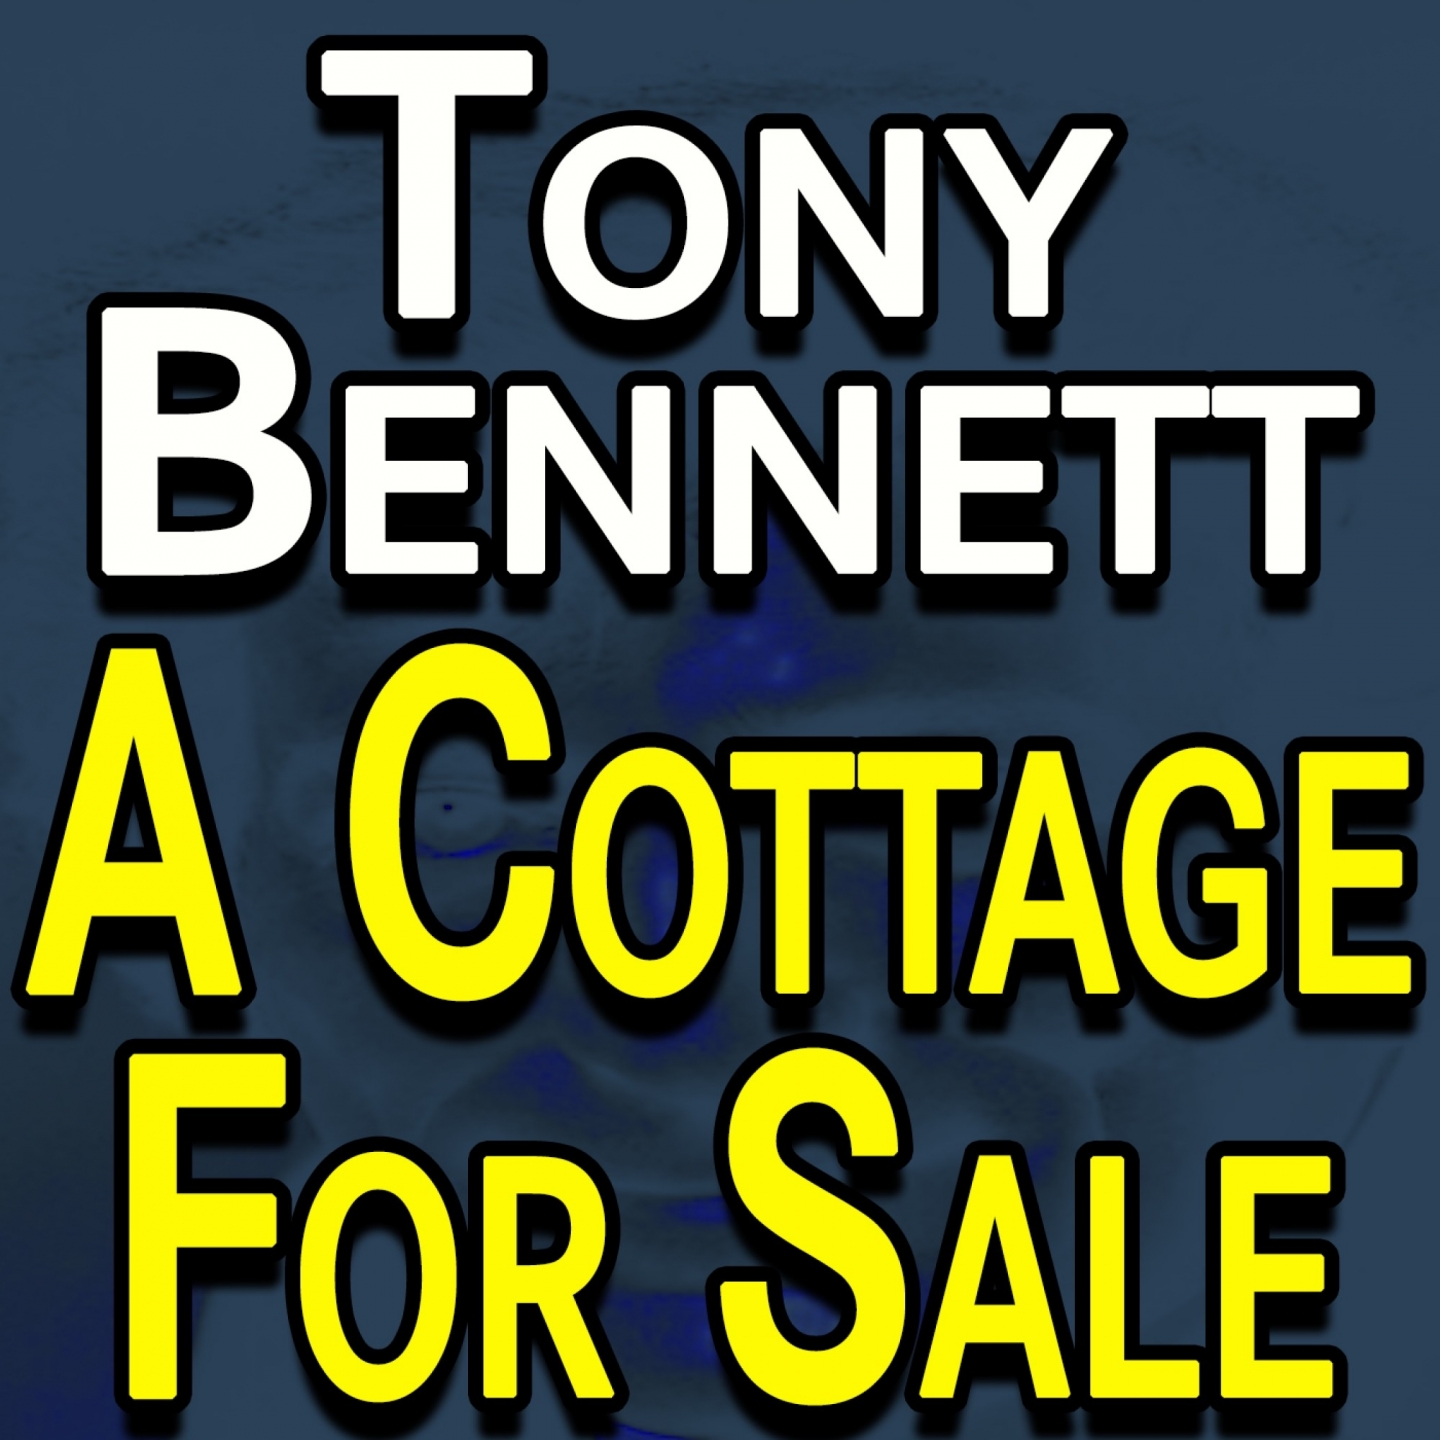 Tony Bennett A Cottage for Sale